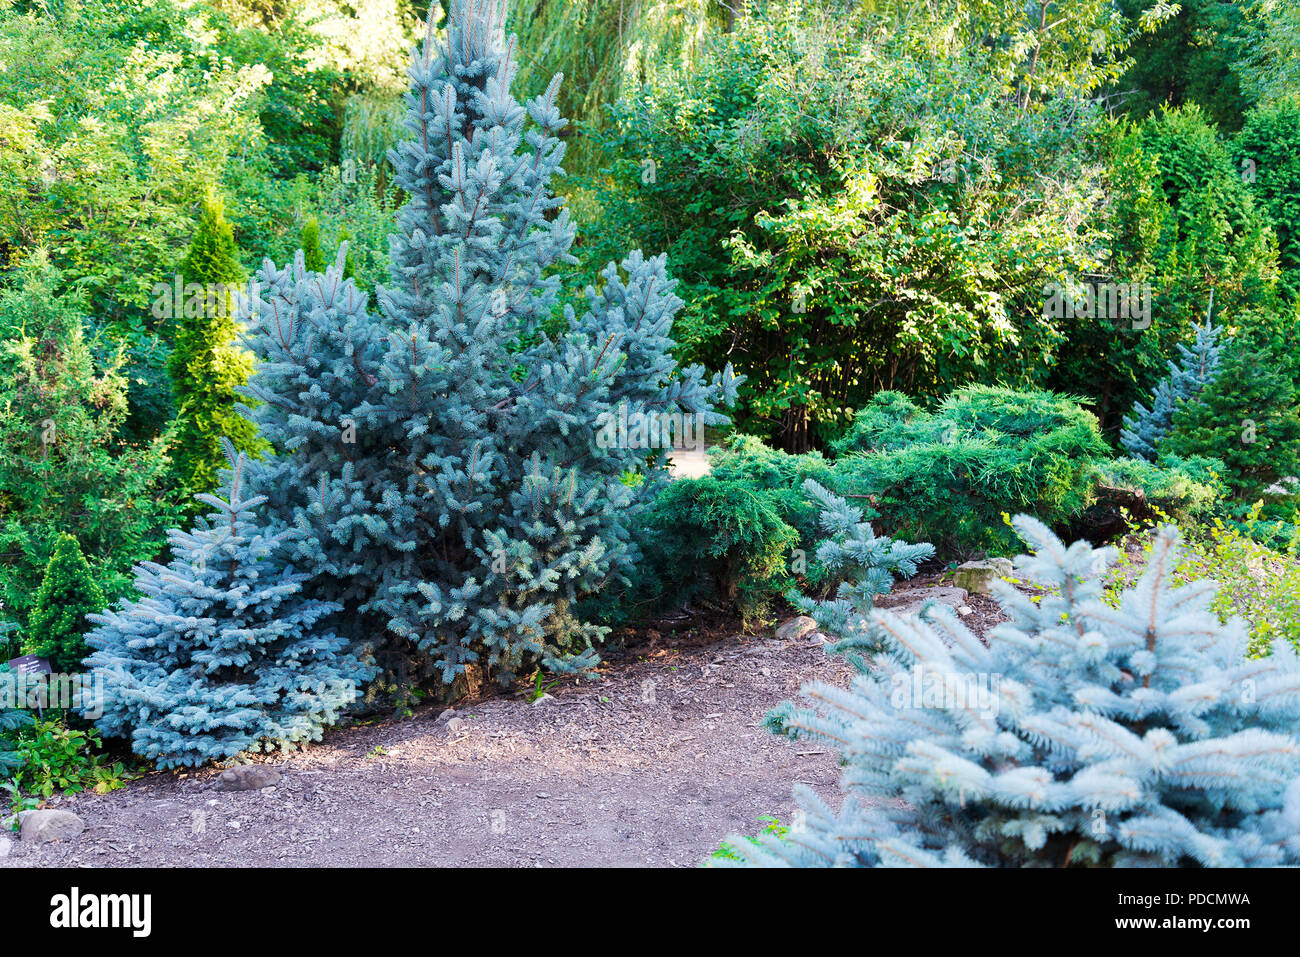 Blue spruce, green spruce, blue spruce, with the scientific name Picea pungens, is a species of spruce tree. Selective focus. Stock Photo